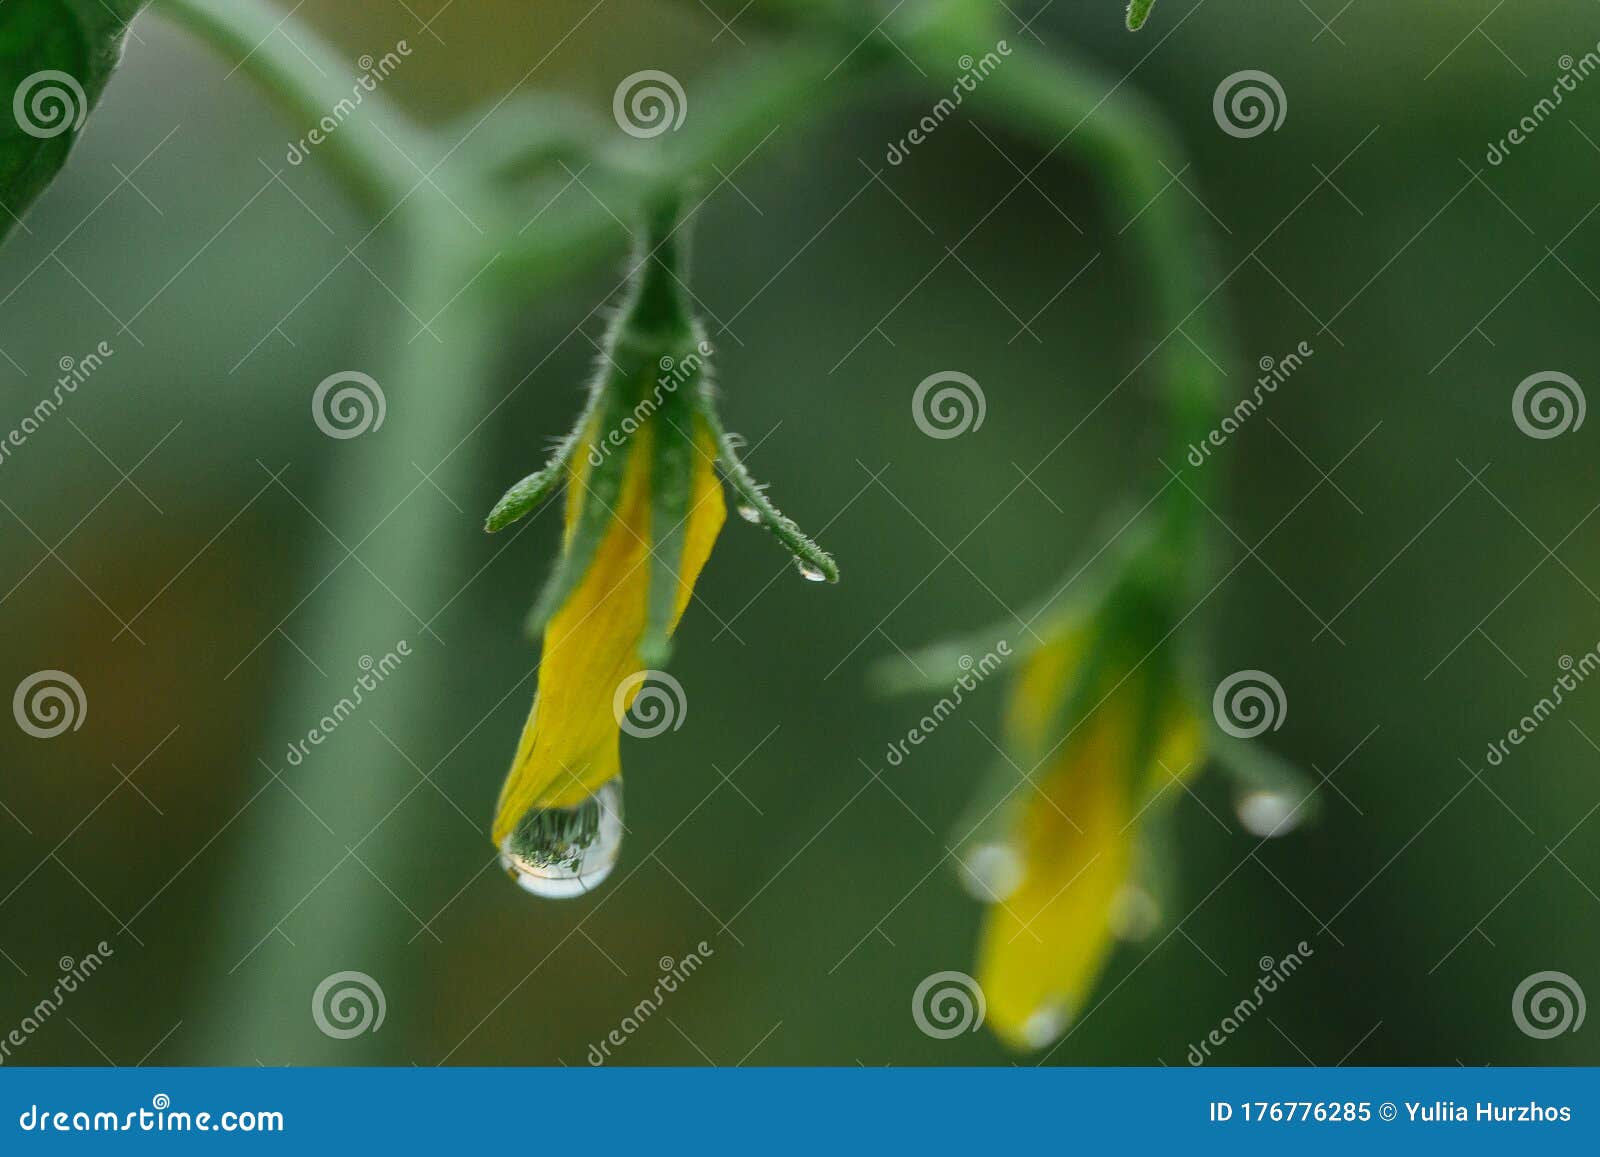 drops of water on vegetables close-up. after the rain. dew on plants in a greenhouse. proper nutrition. veganism, farming, home-